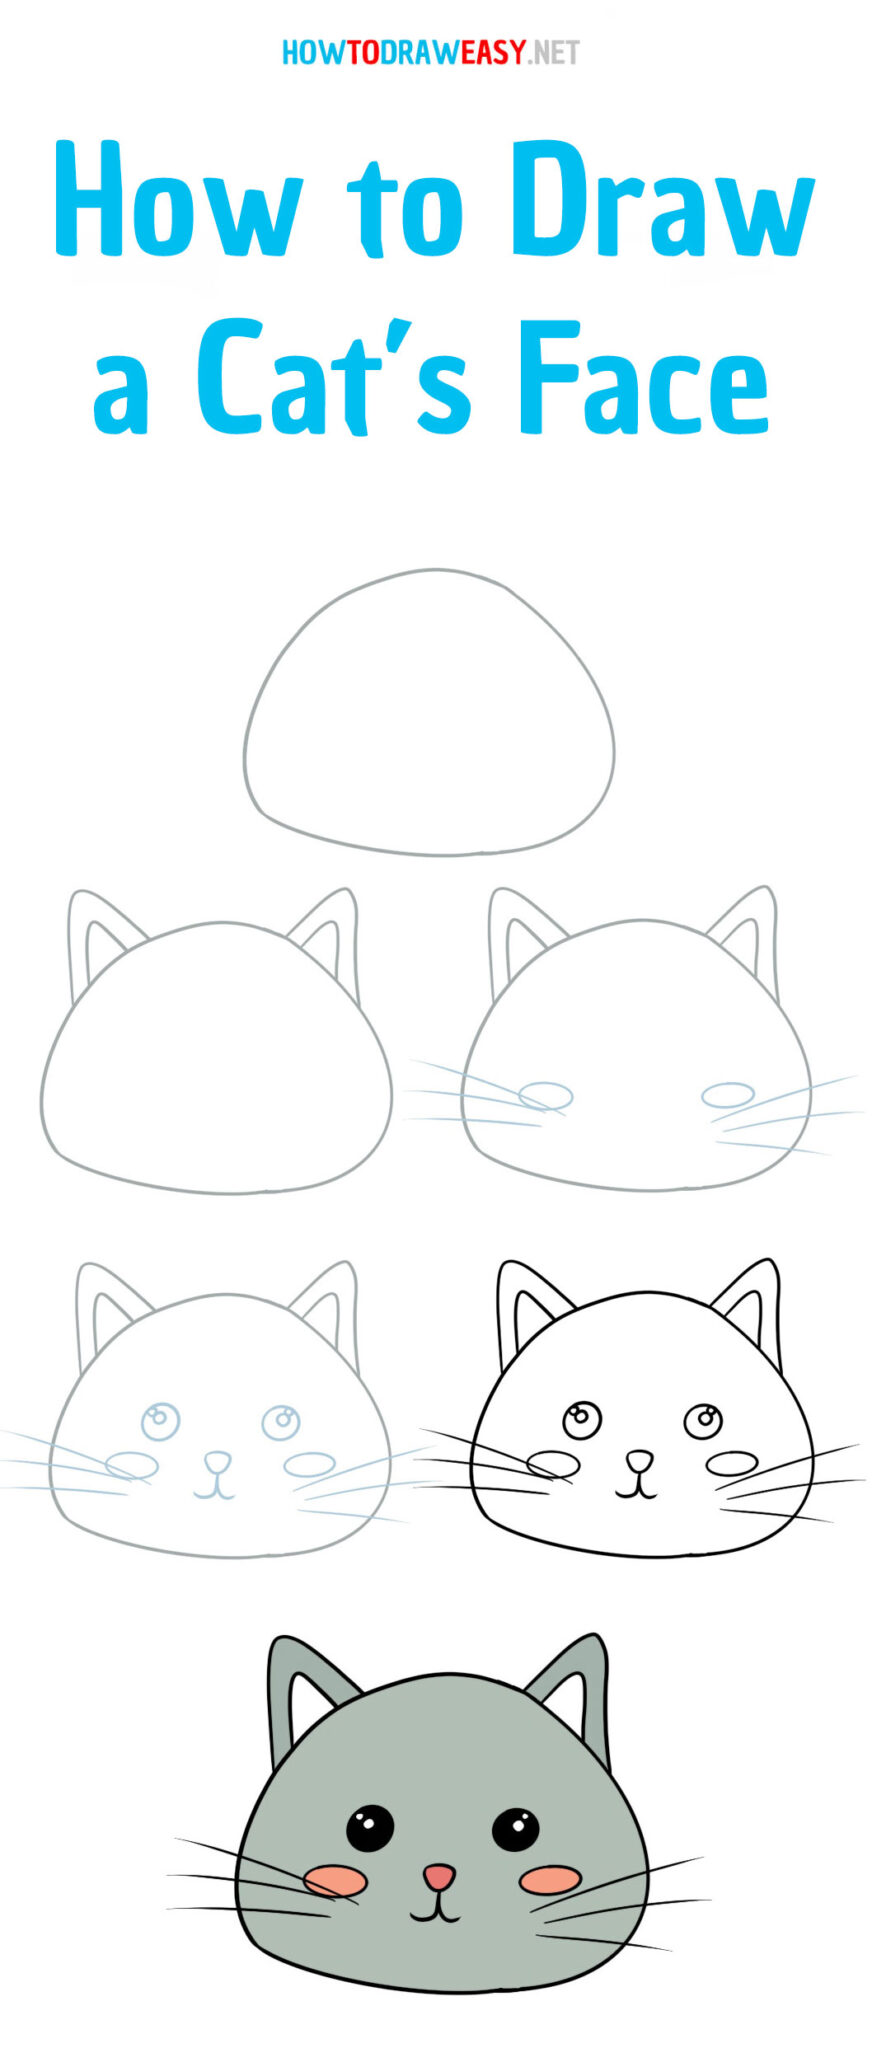 How to Draw a Cat's Face - How to Draw Easy